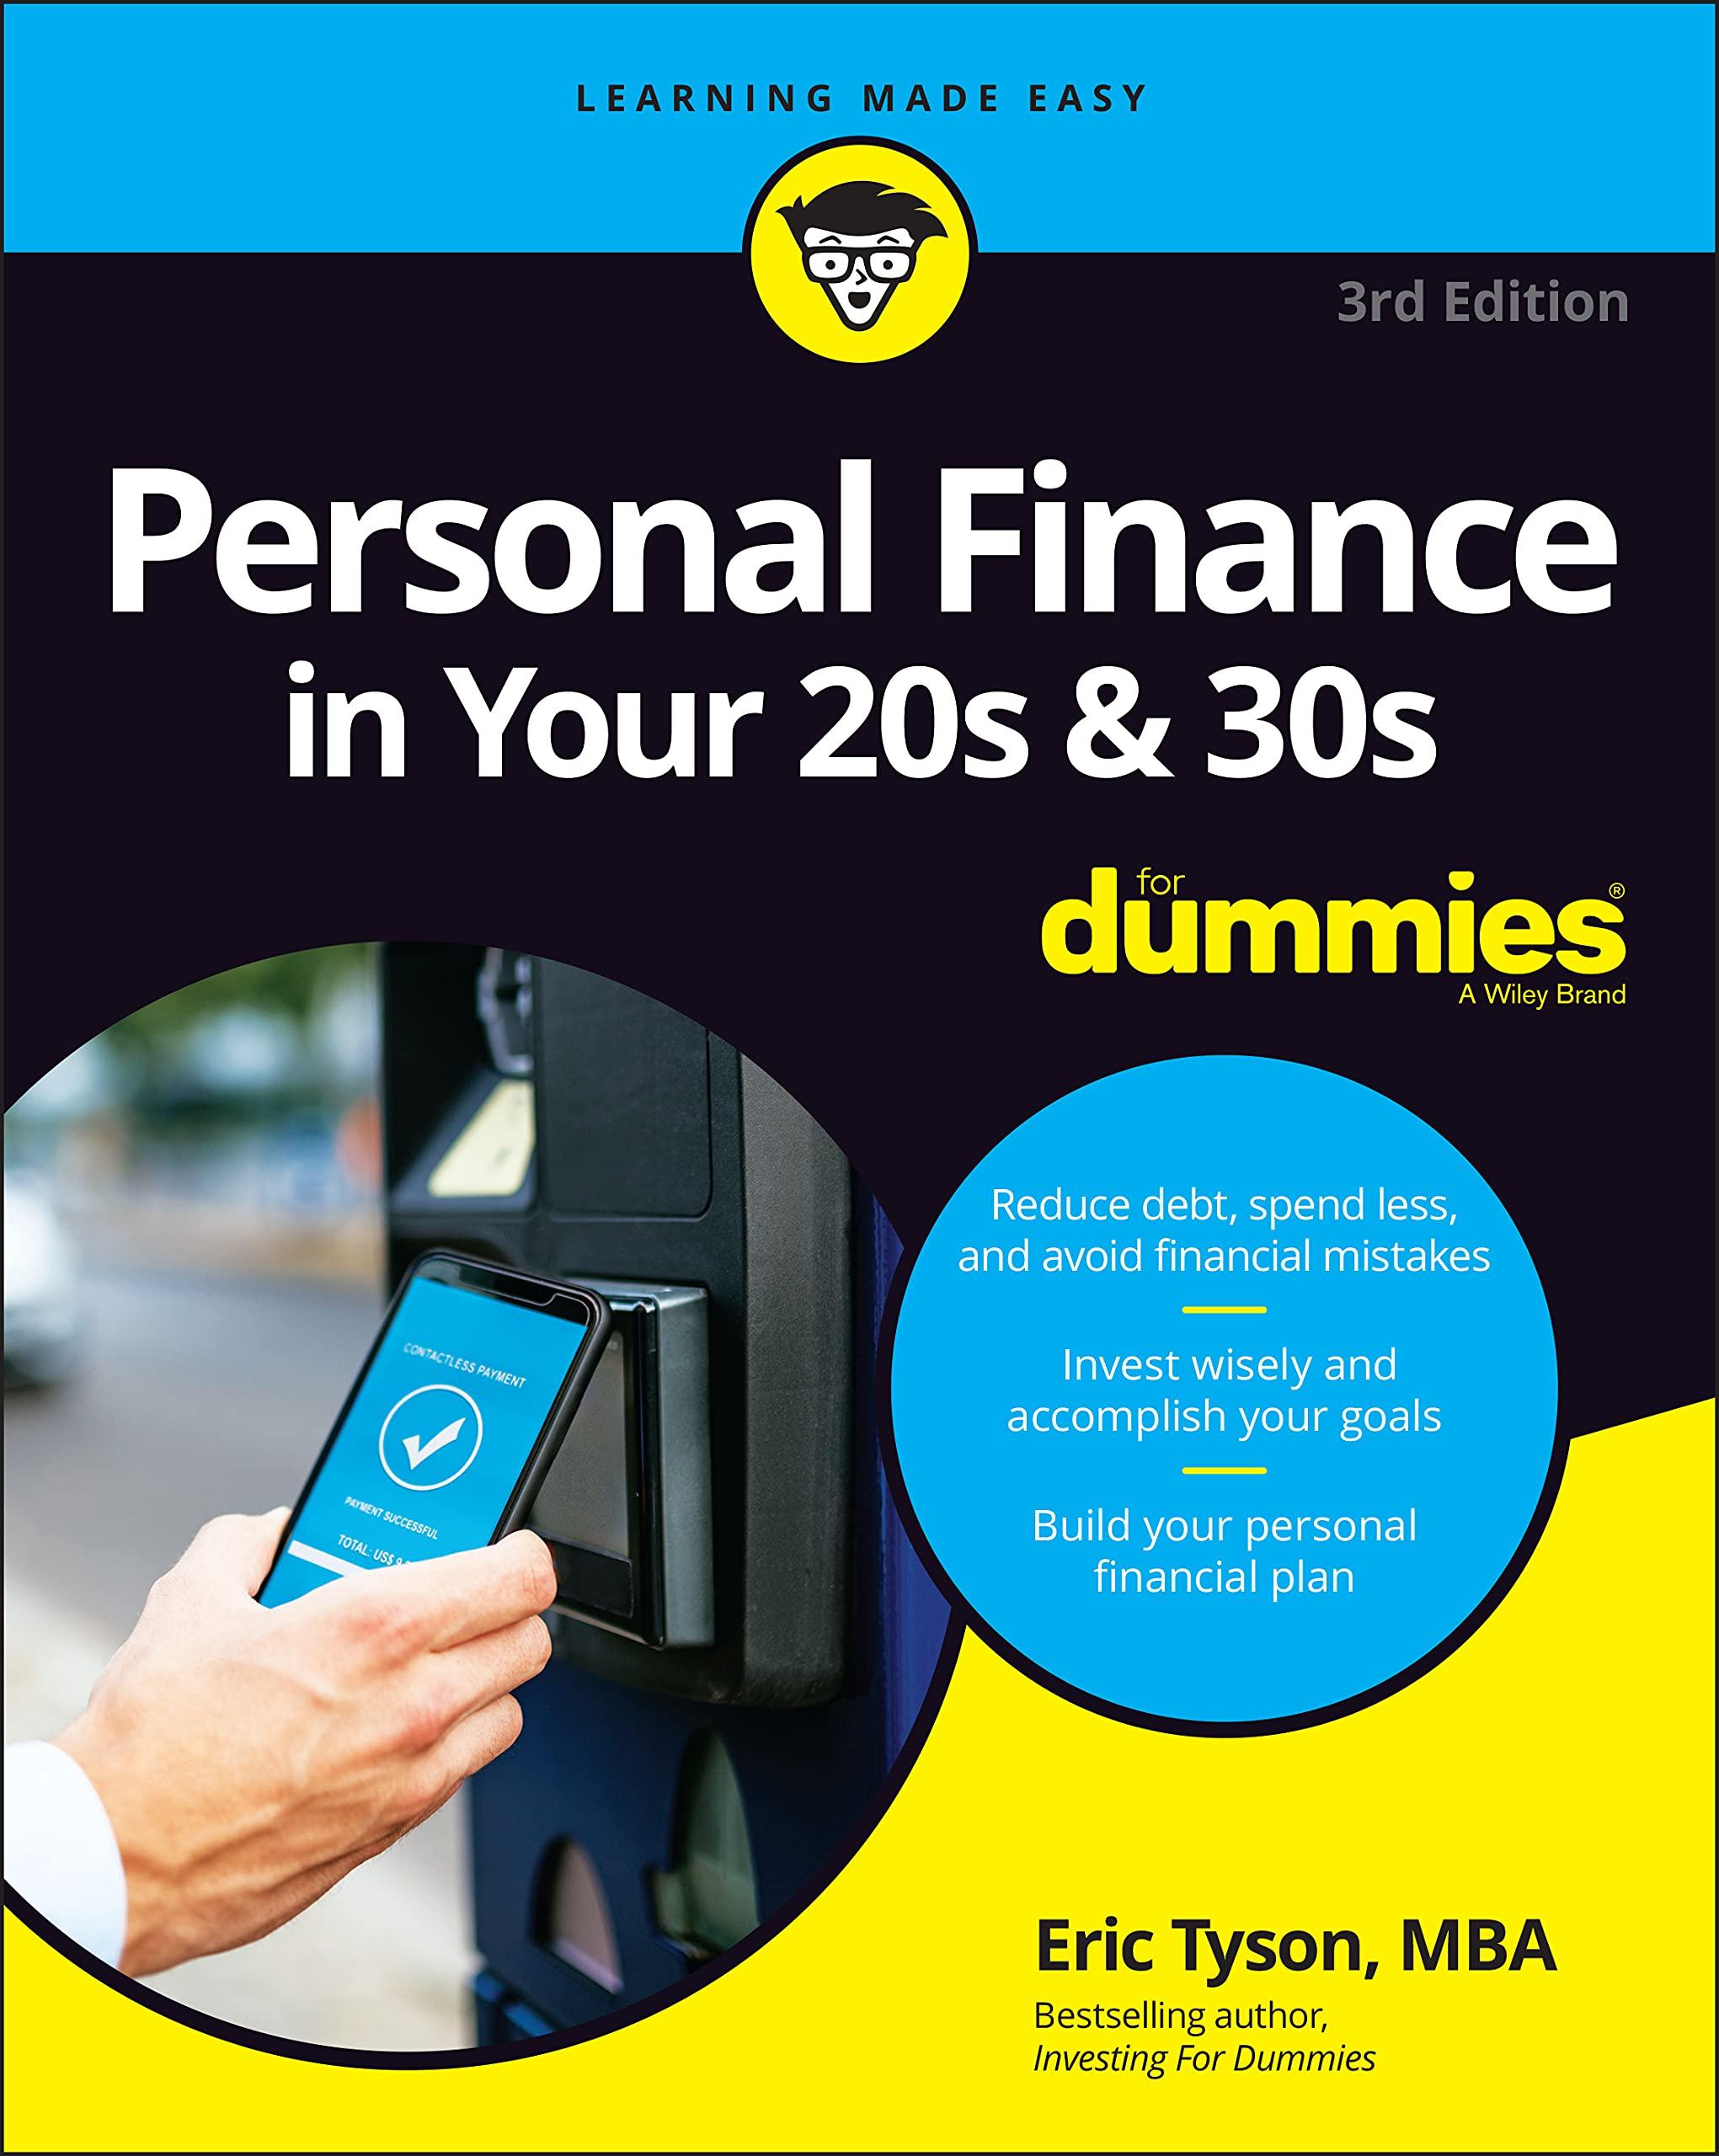 personal finance in your 20s and 30s for dummies 3rd edition eric tyson 1119805430, 978-1119805434